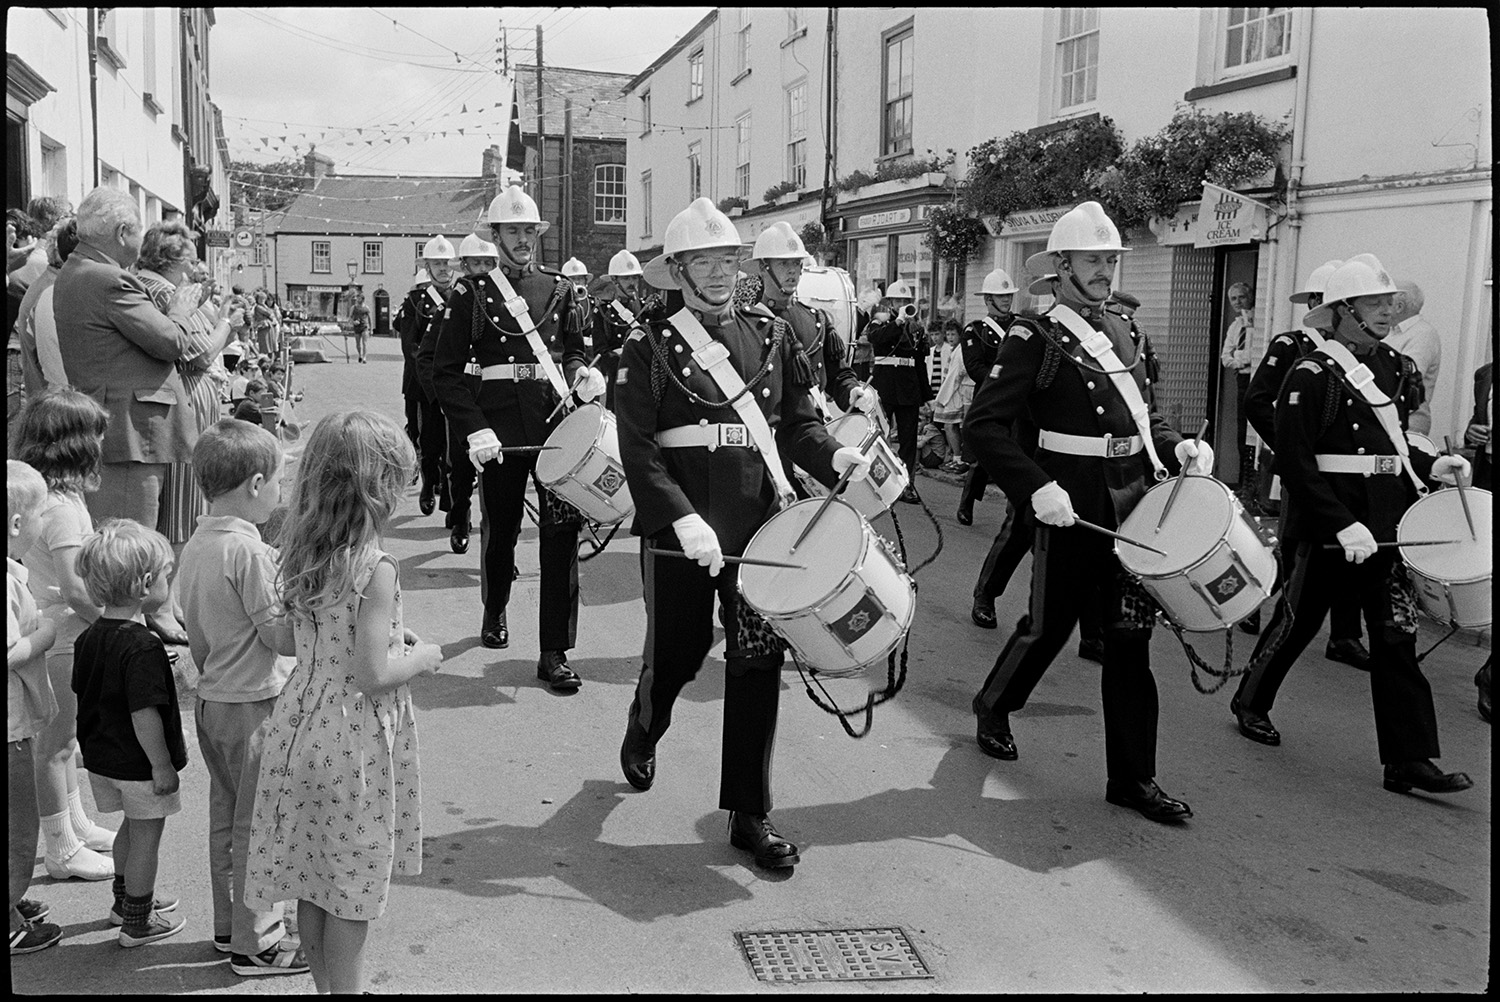 Corps of drums parading before fair procession with queen and fancy dress entries.
[Corps of drums playing and marching down a street with men, women and children lining the street to watch at Chulmleigh Fair. The street is decorated with bunting and shop fronts can be seen in the background.]